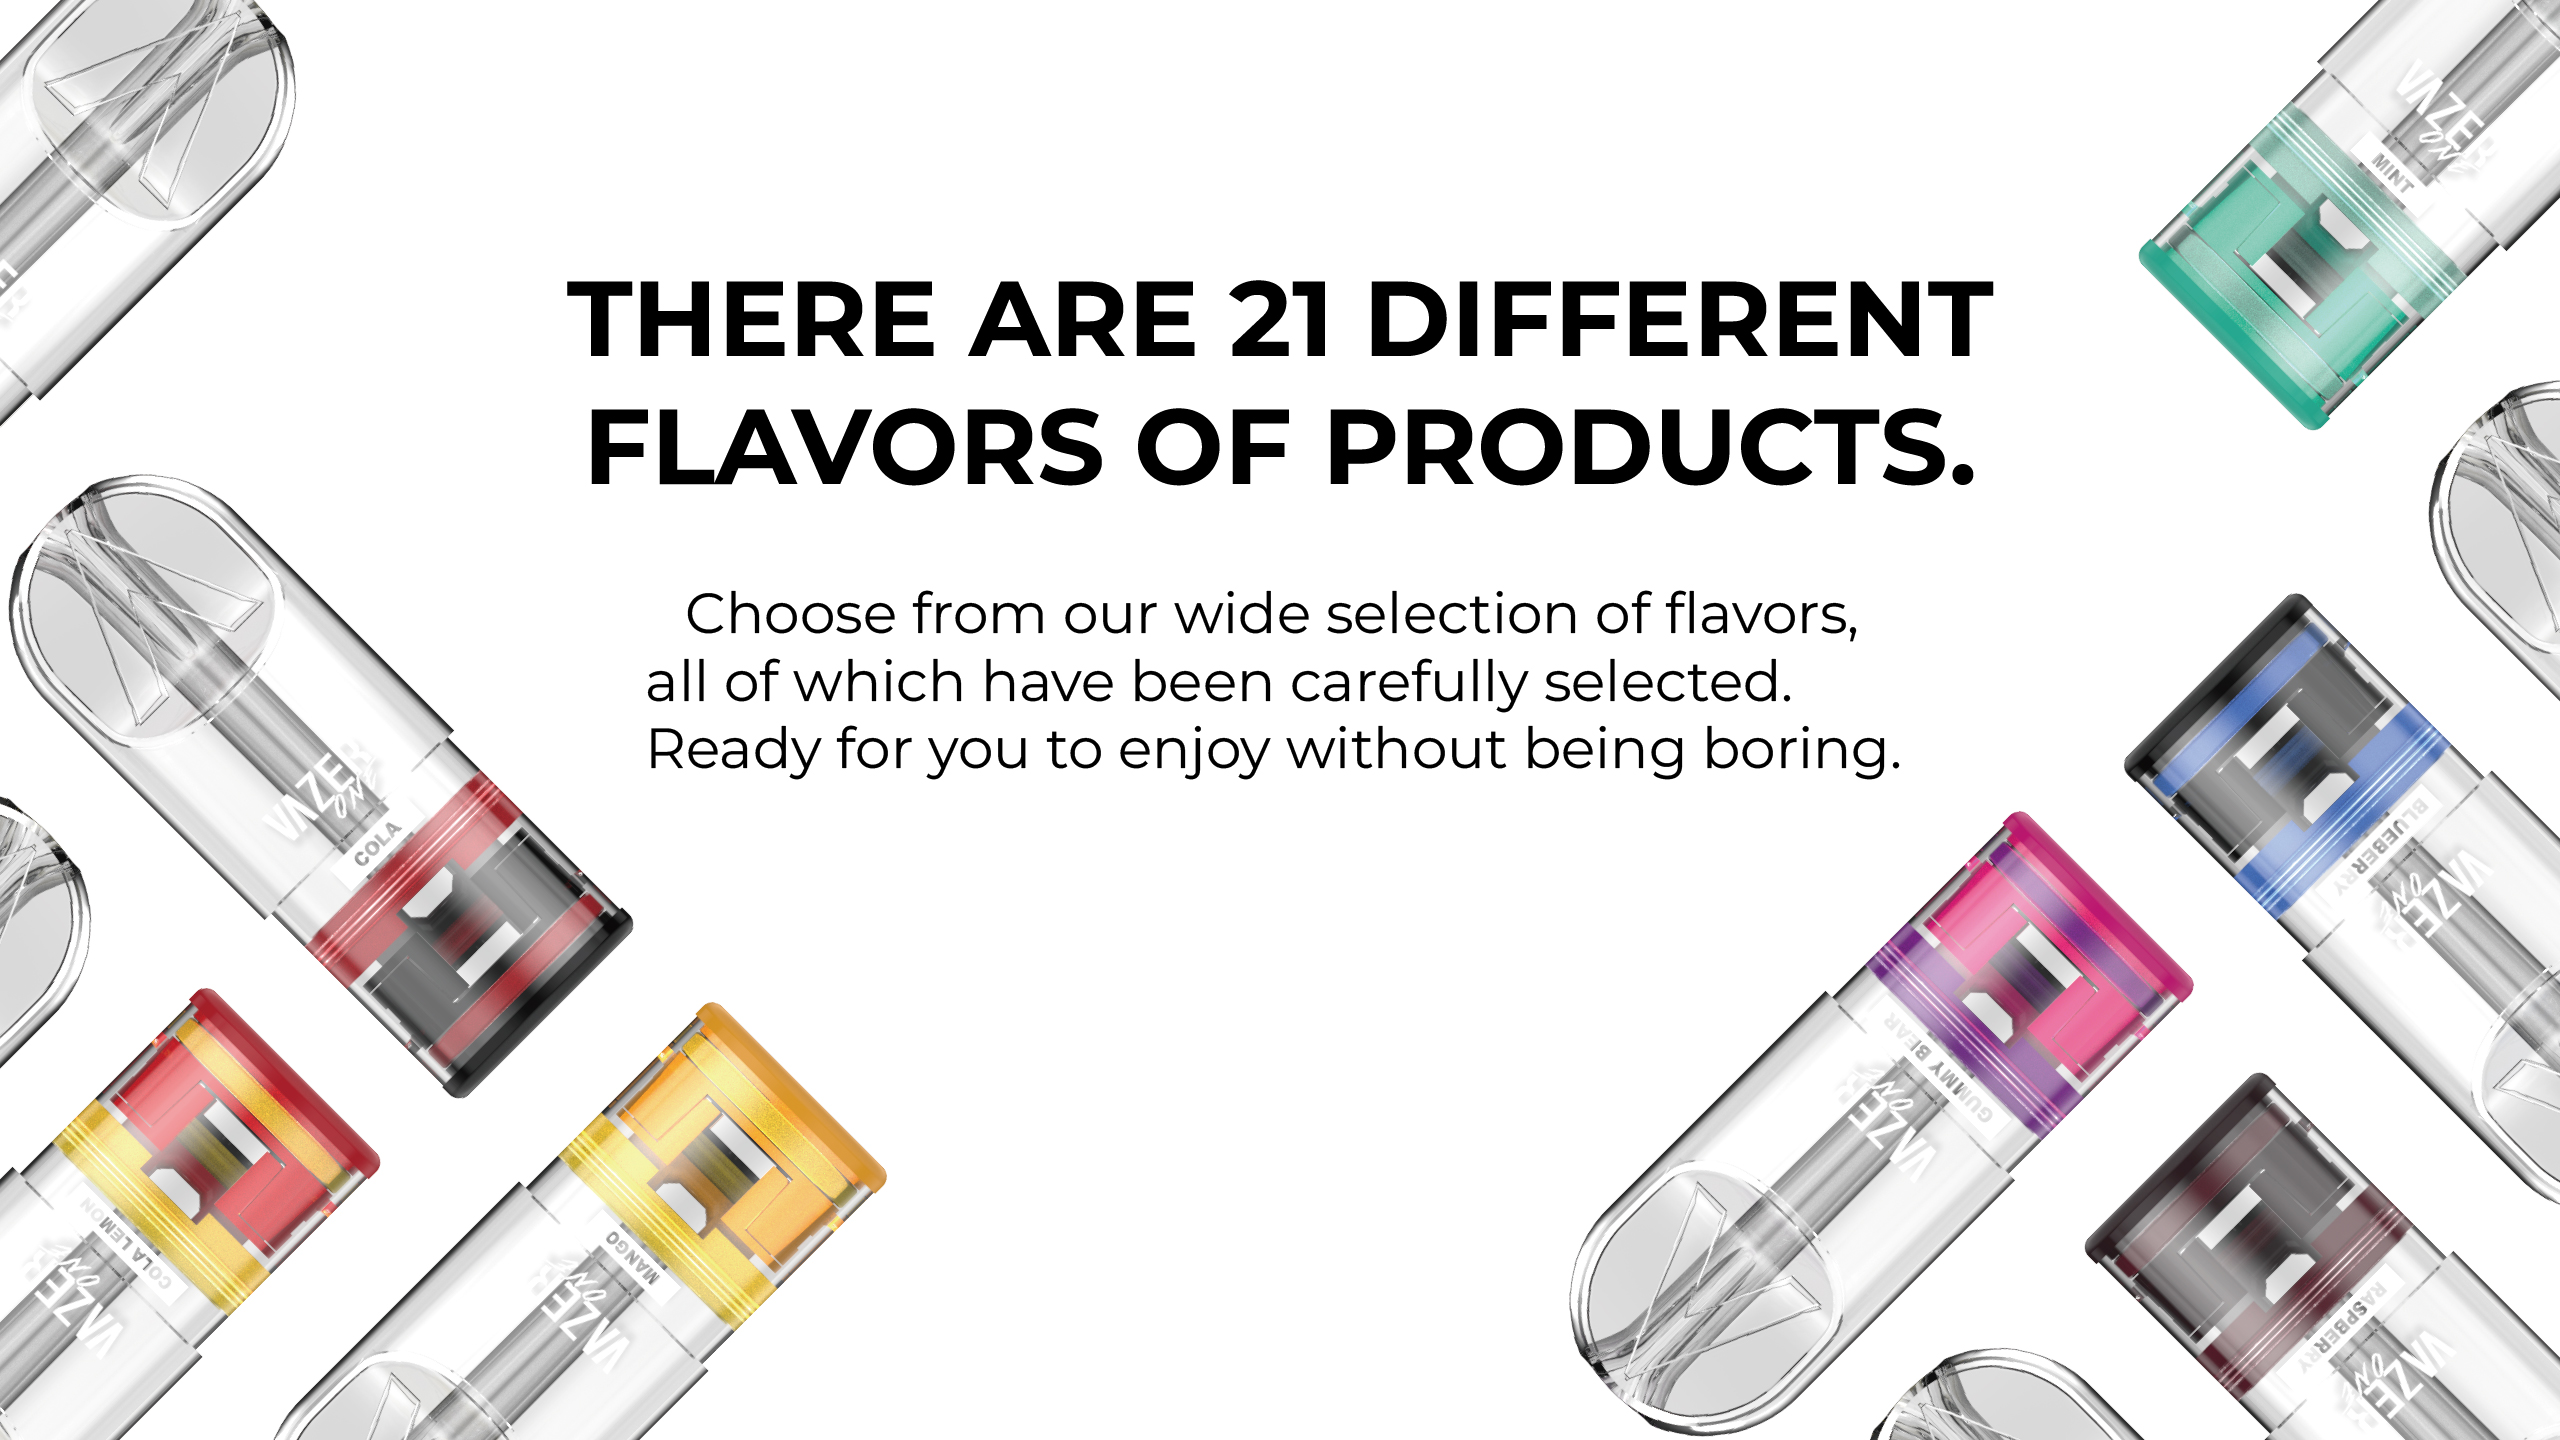 There are 21 different flavors of products. Choose from our wide selection of flavors, all of which have been carefully selected. Ready for you to enjoy without being boring.